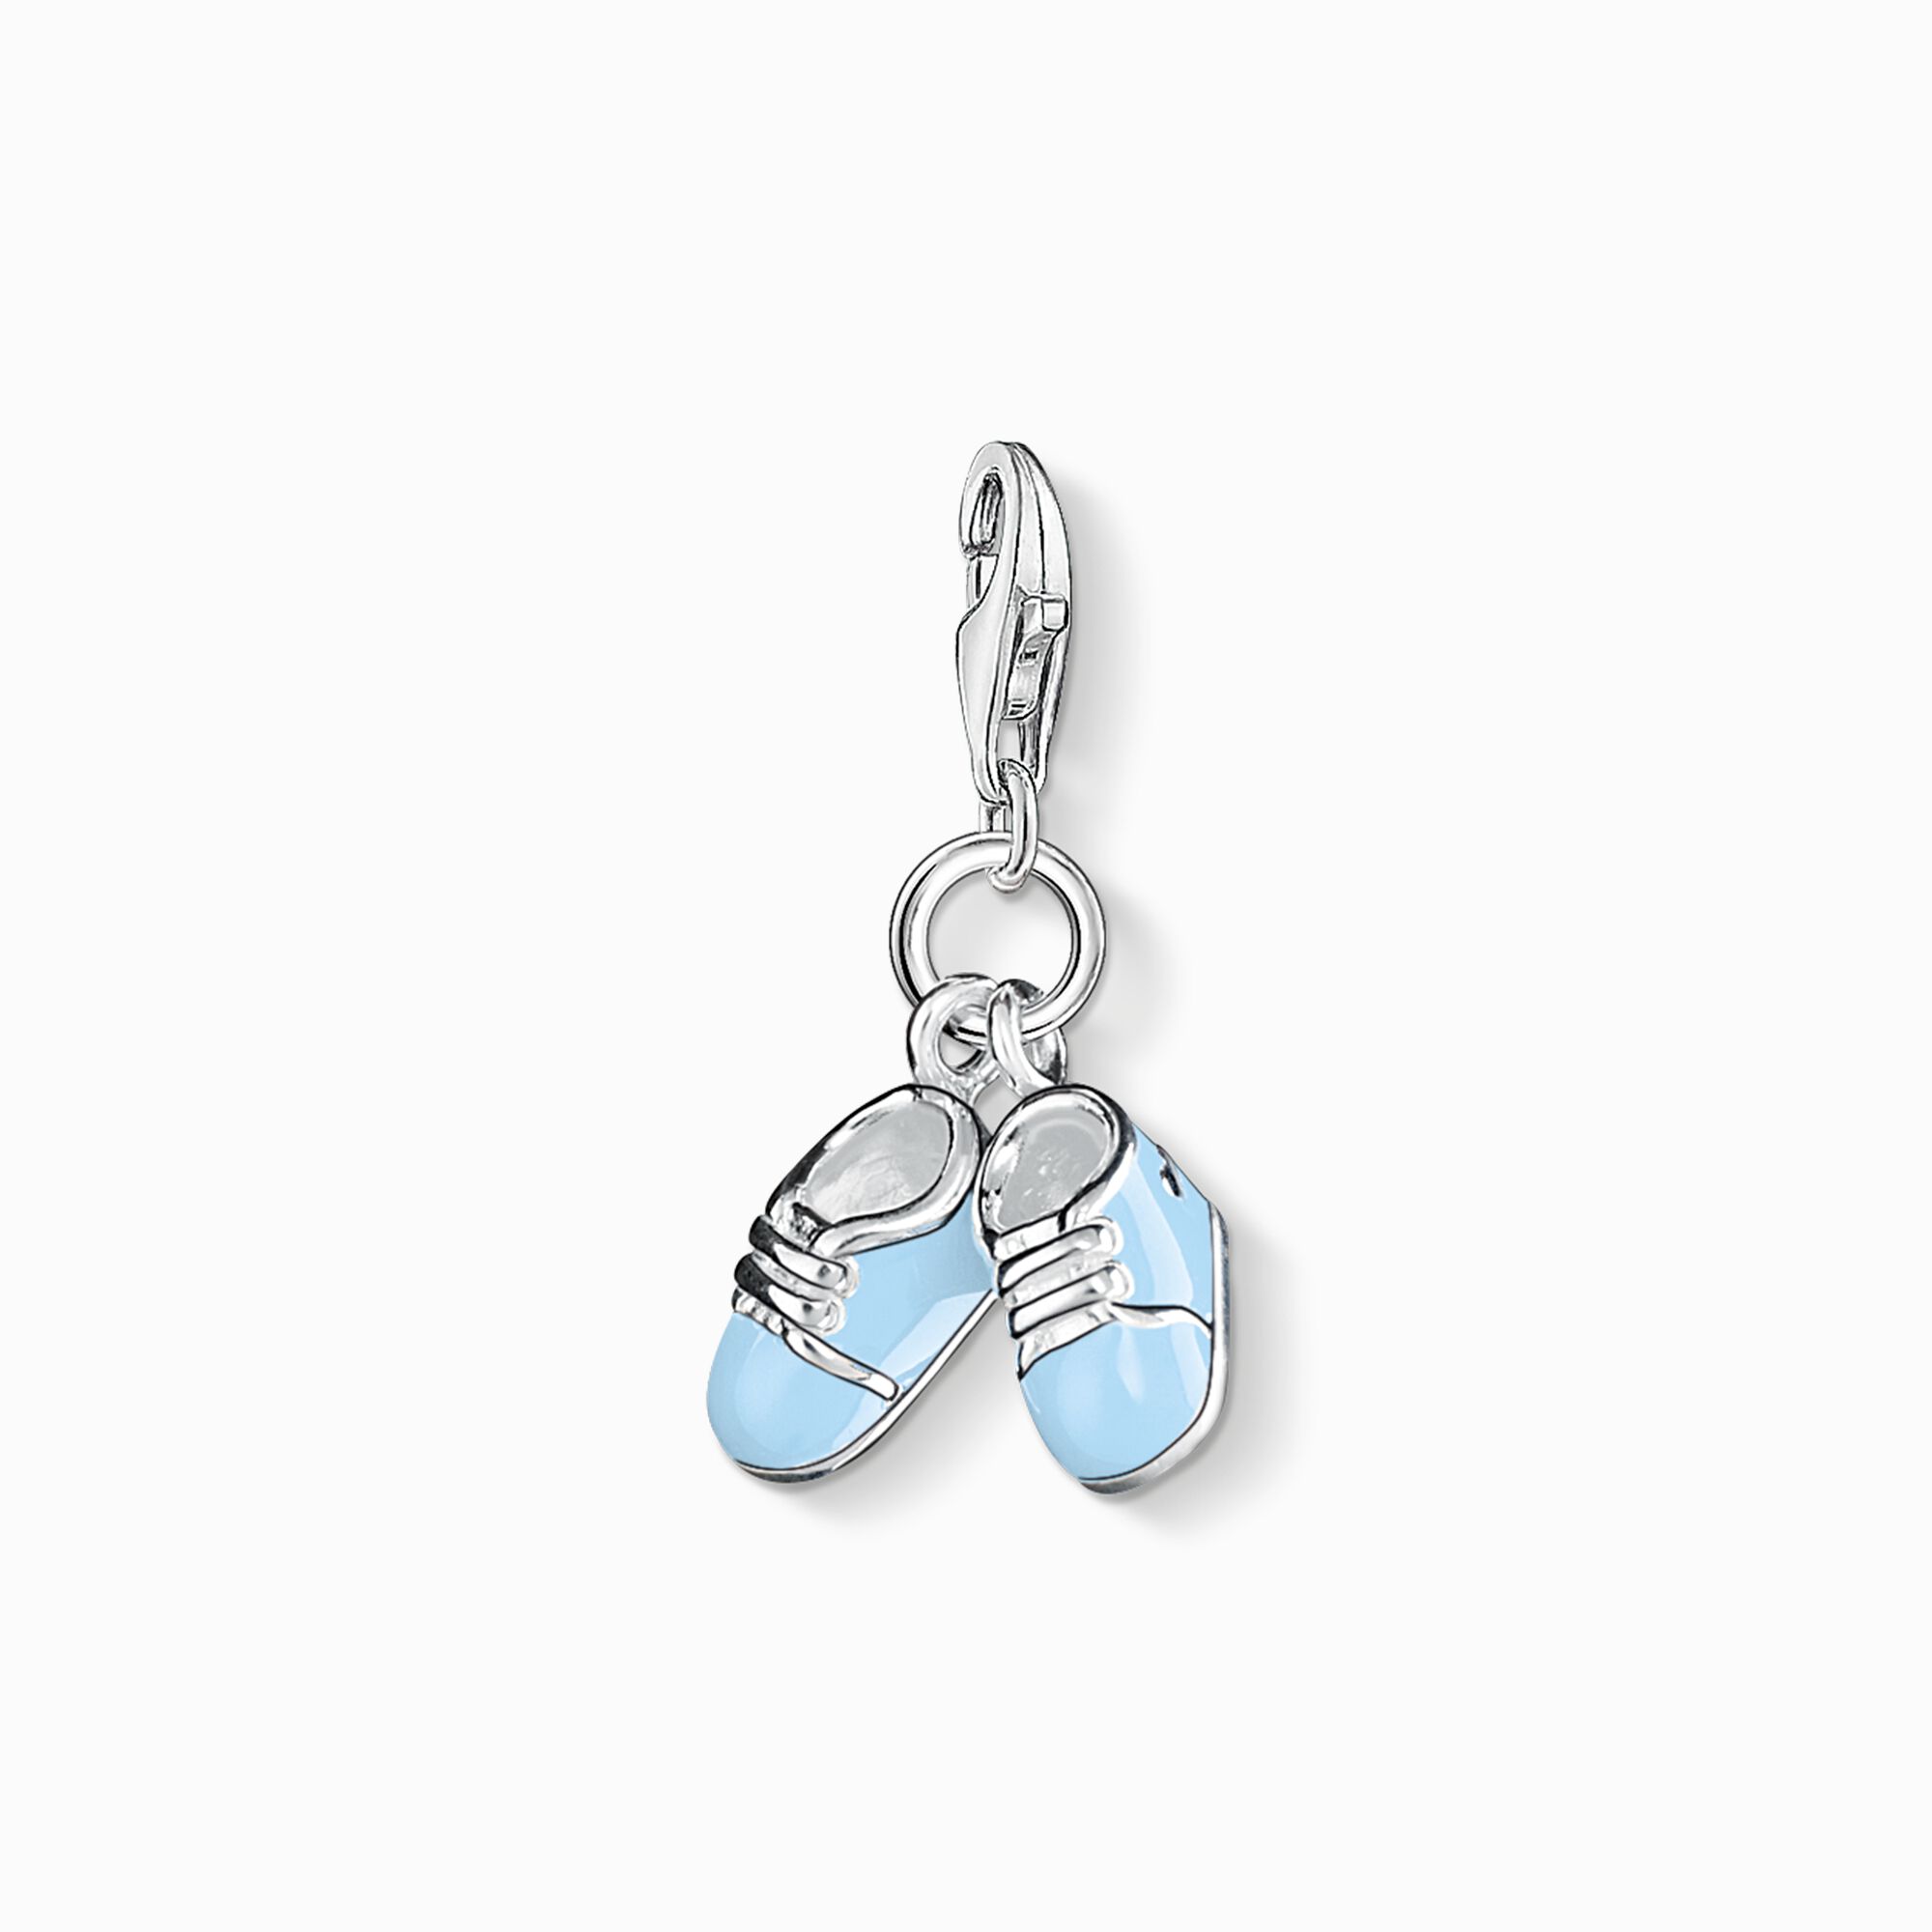 Charm pendant blue baby shoes from the Charm Club collection in the THOMAS SABO online store